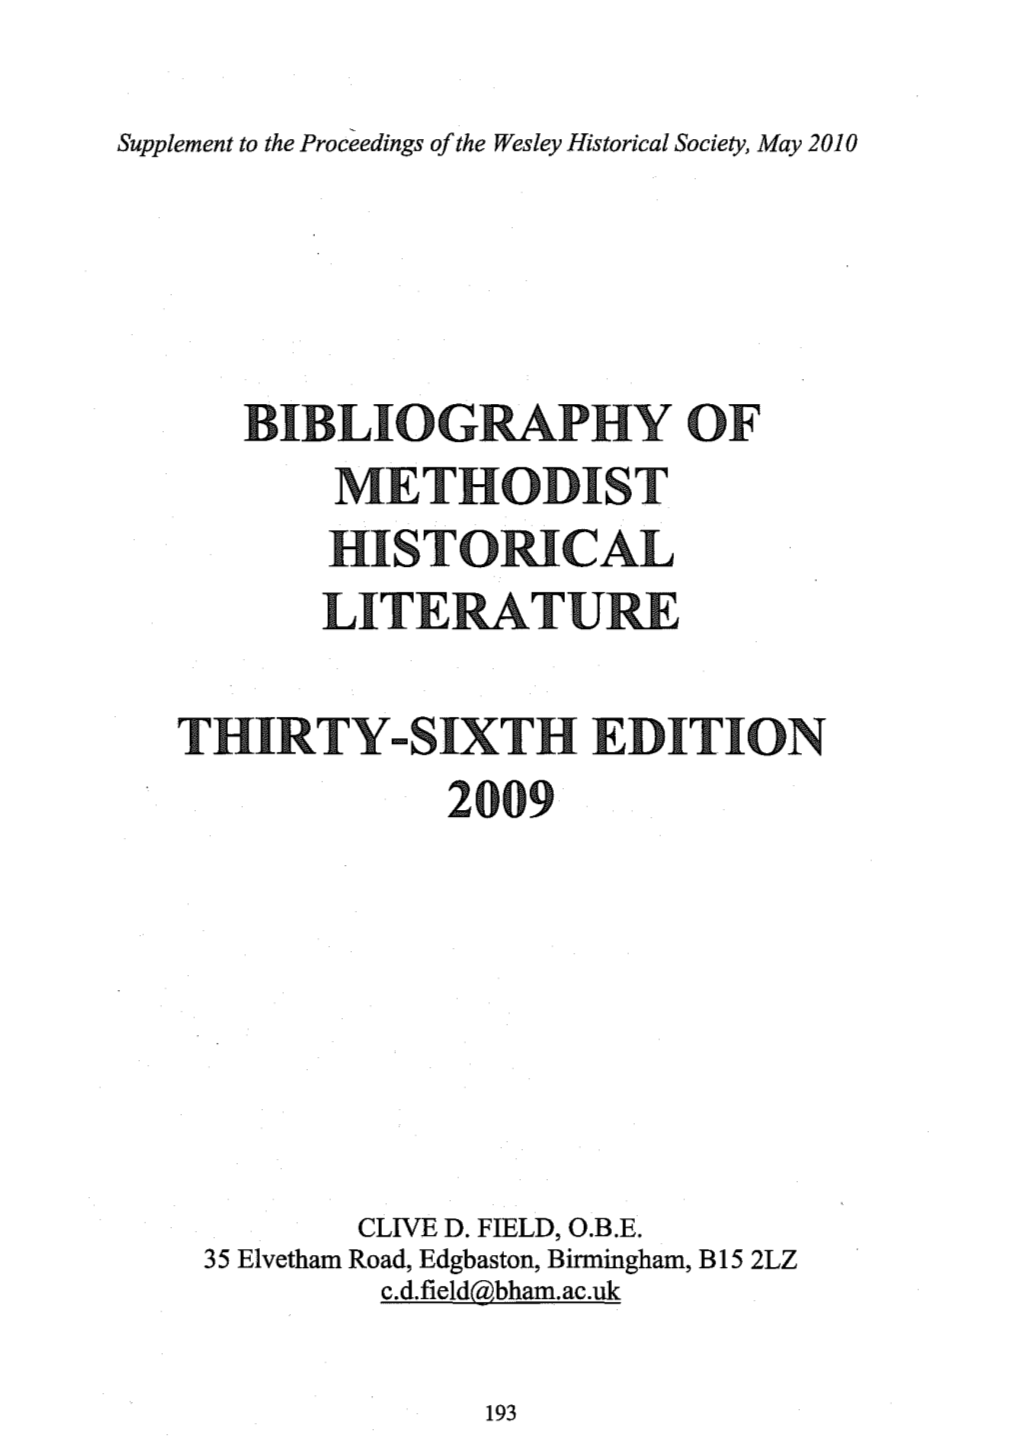 Clive D. Field, Bibliography of Methodist Historical Literature, Thirty-Sixth Edition 2009. Supplement to the Proceedings